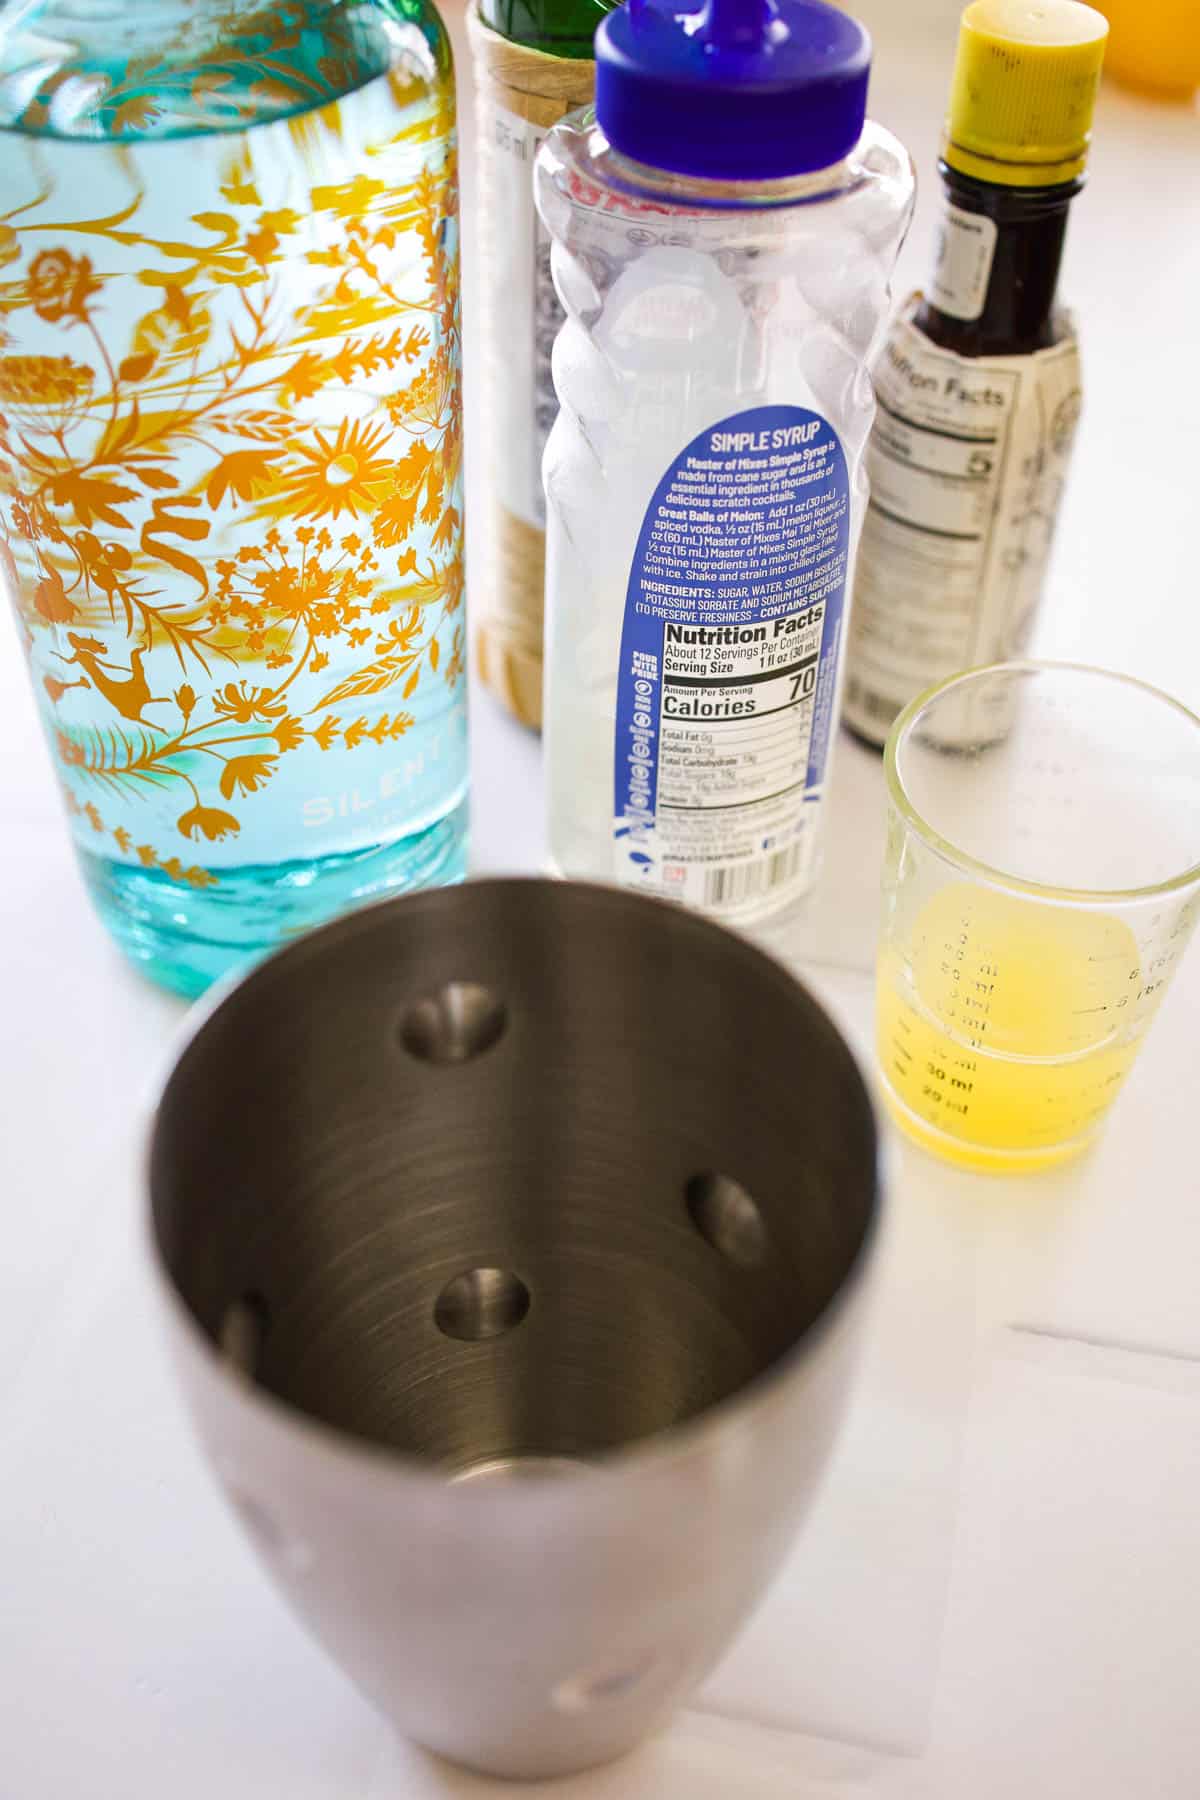 Cocktail shaker next to cocktail ingredients.